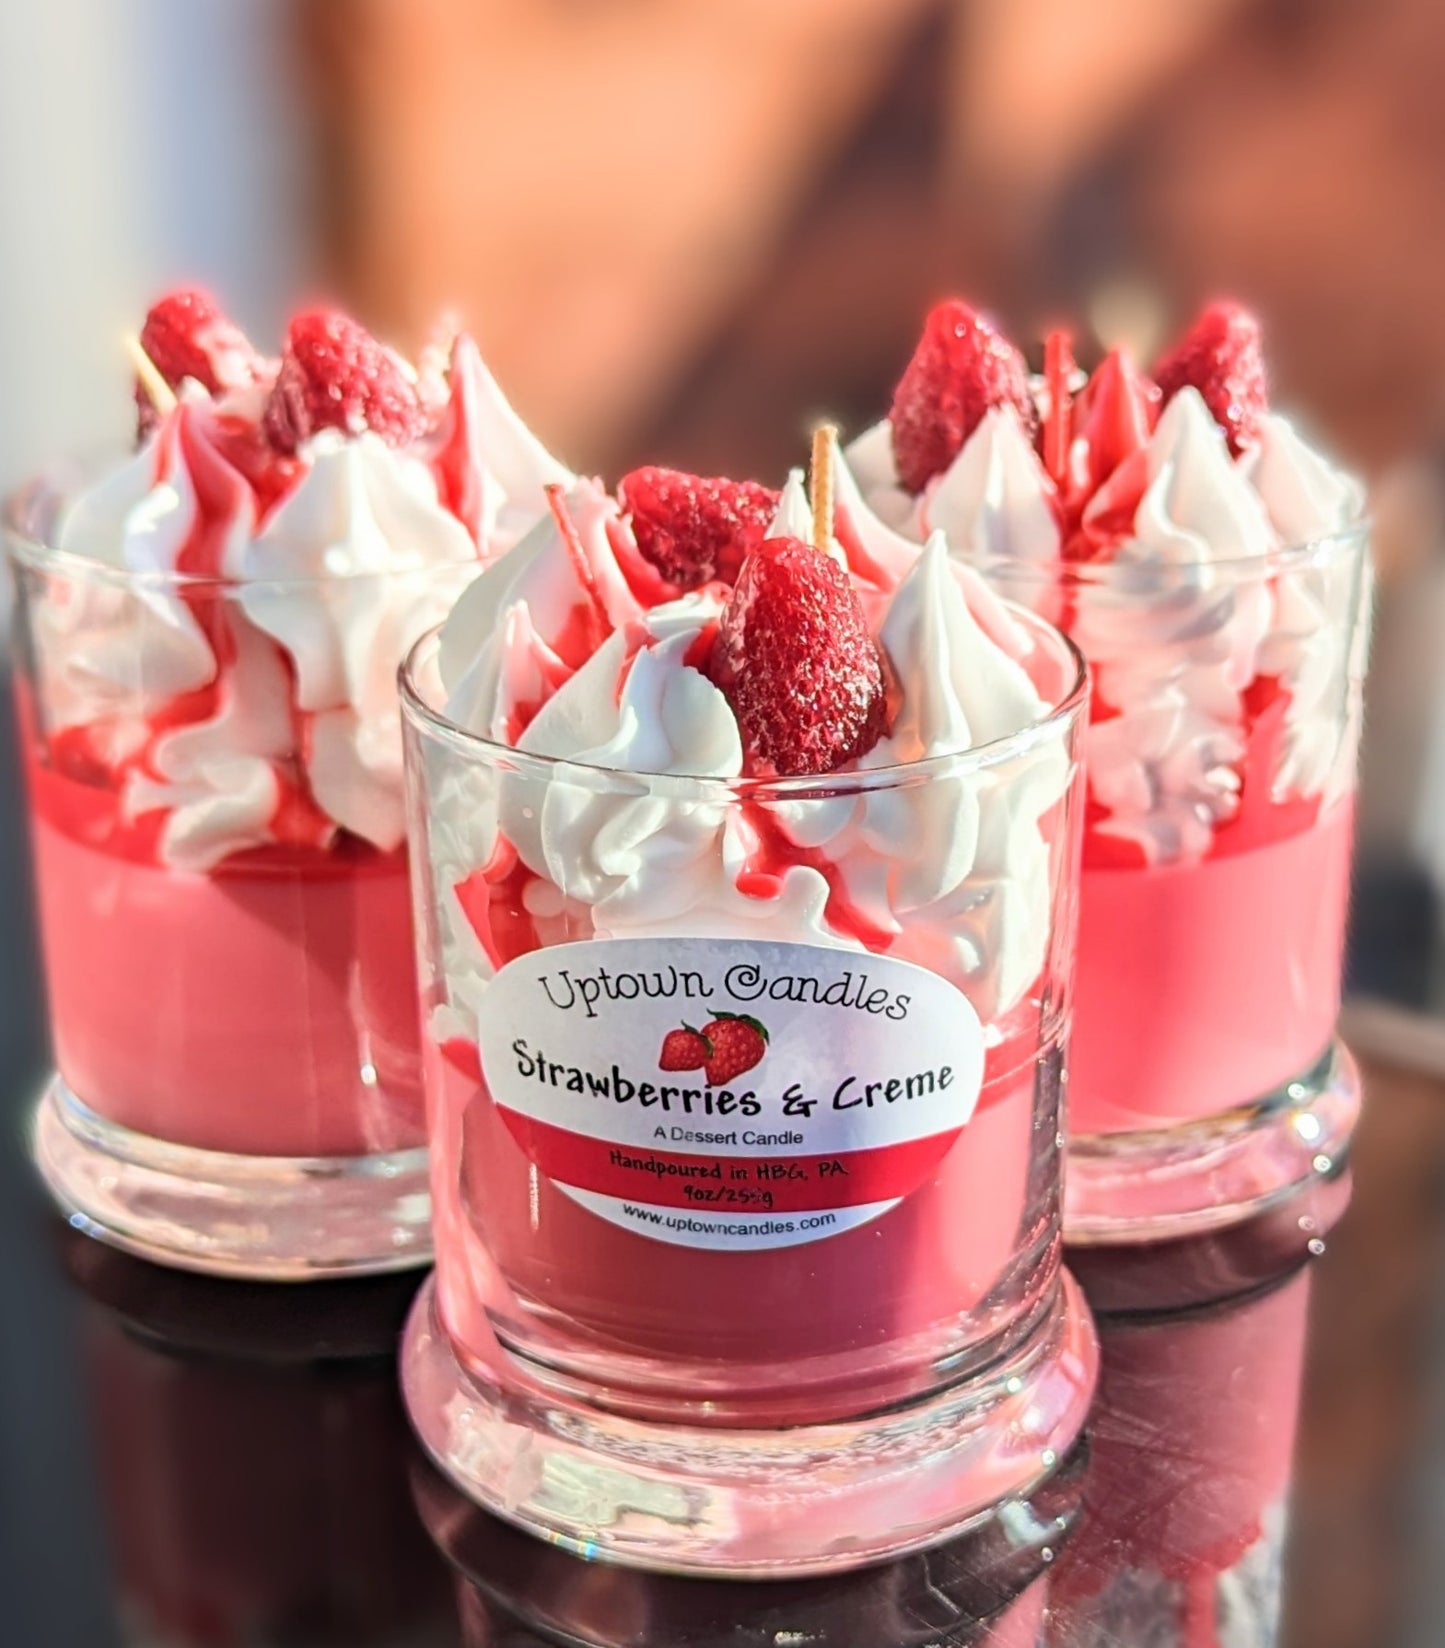 Strawberries and Creme Dessert Candle